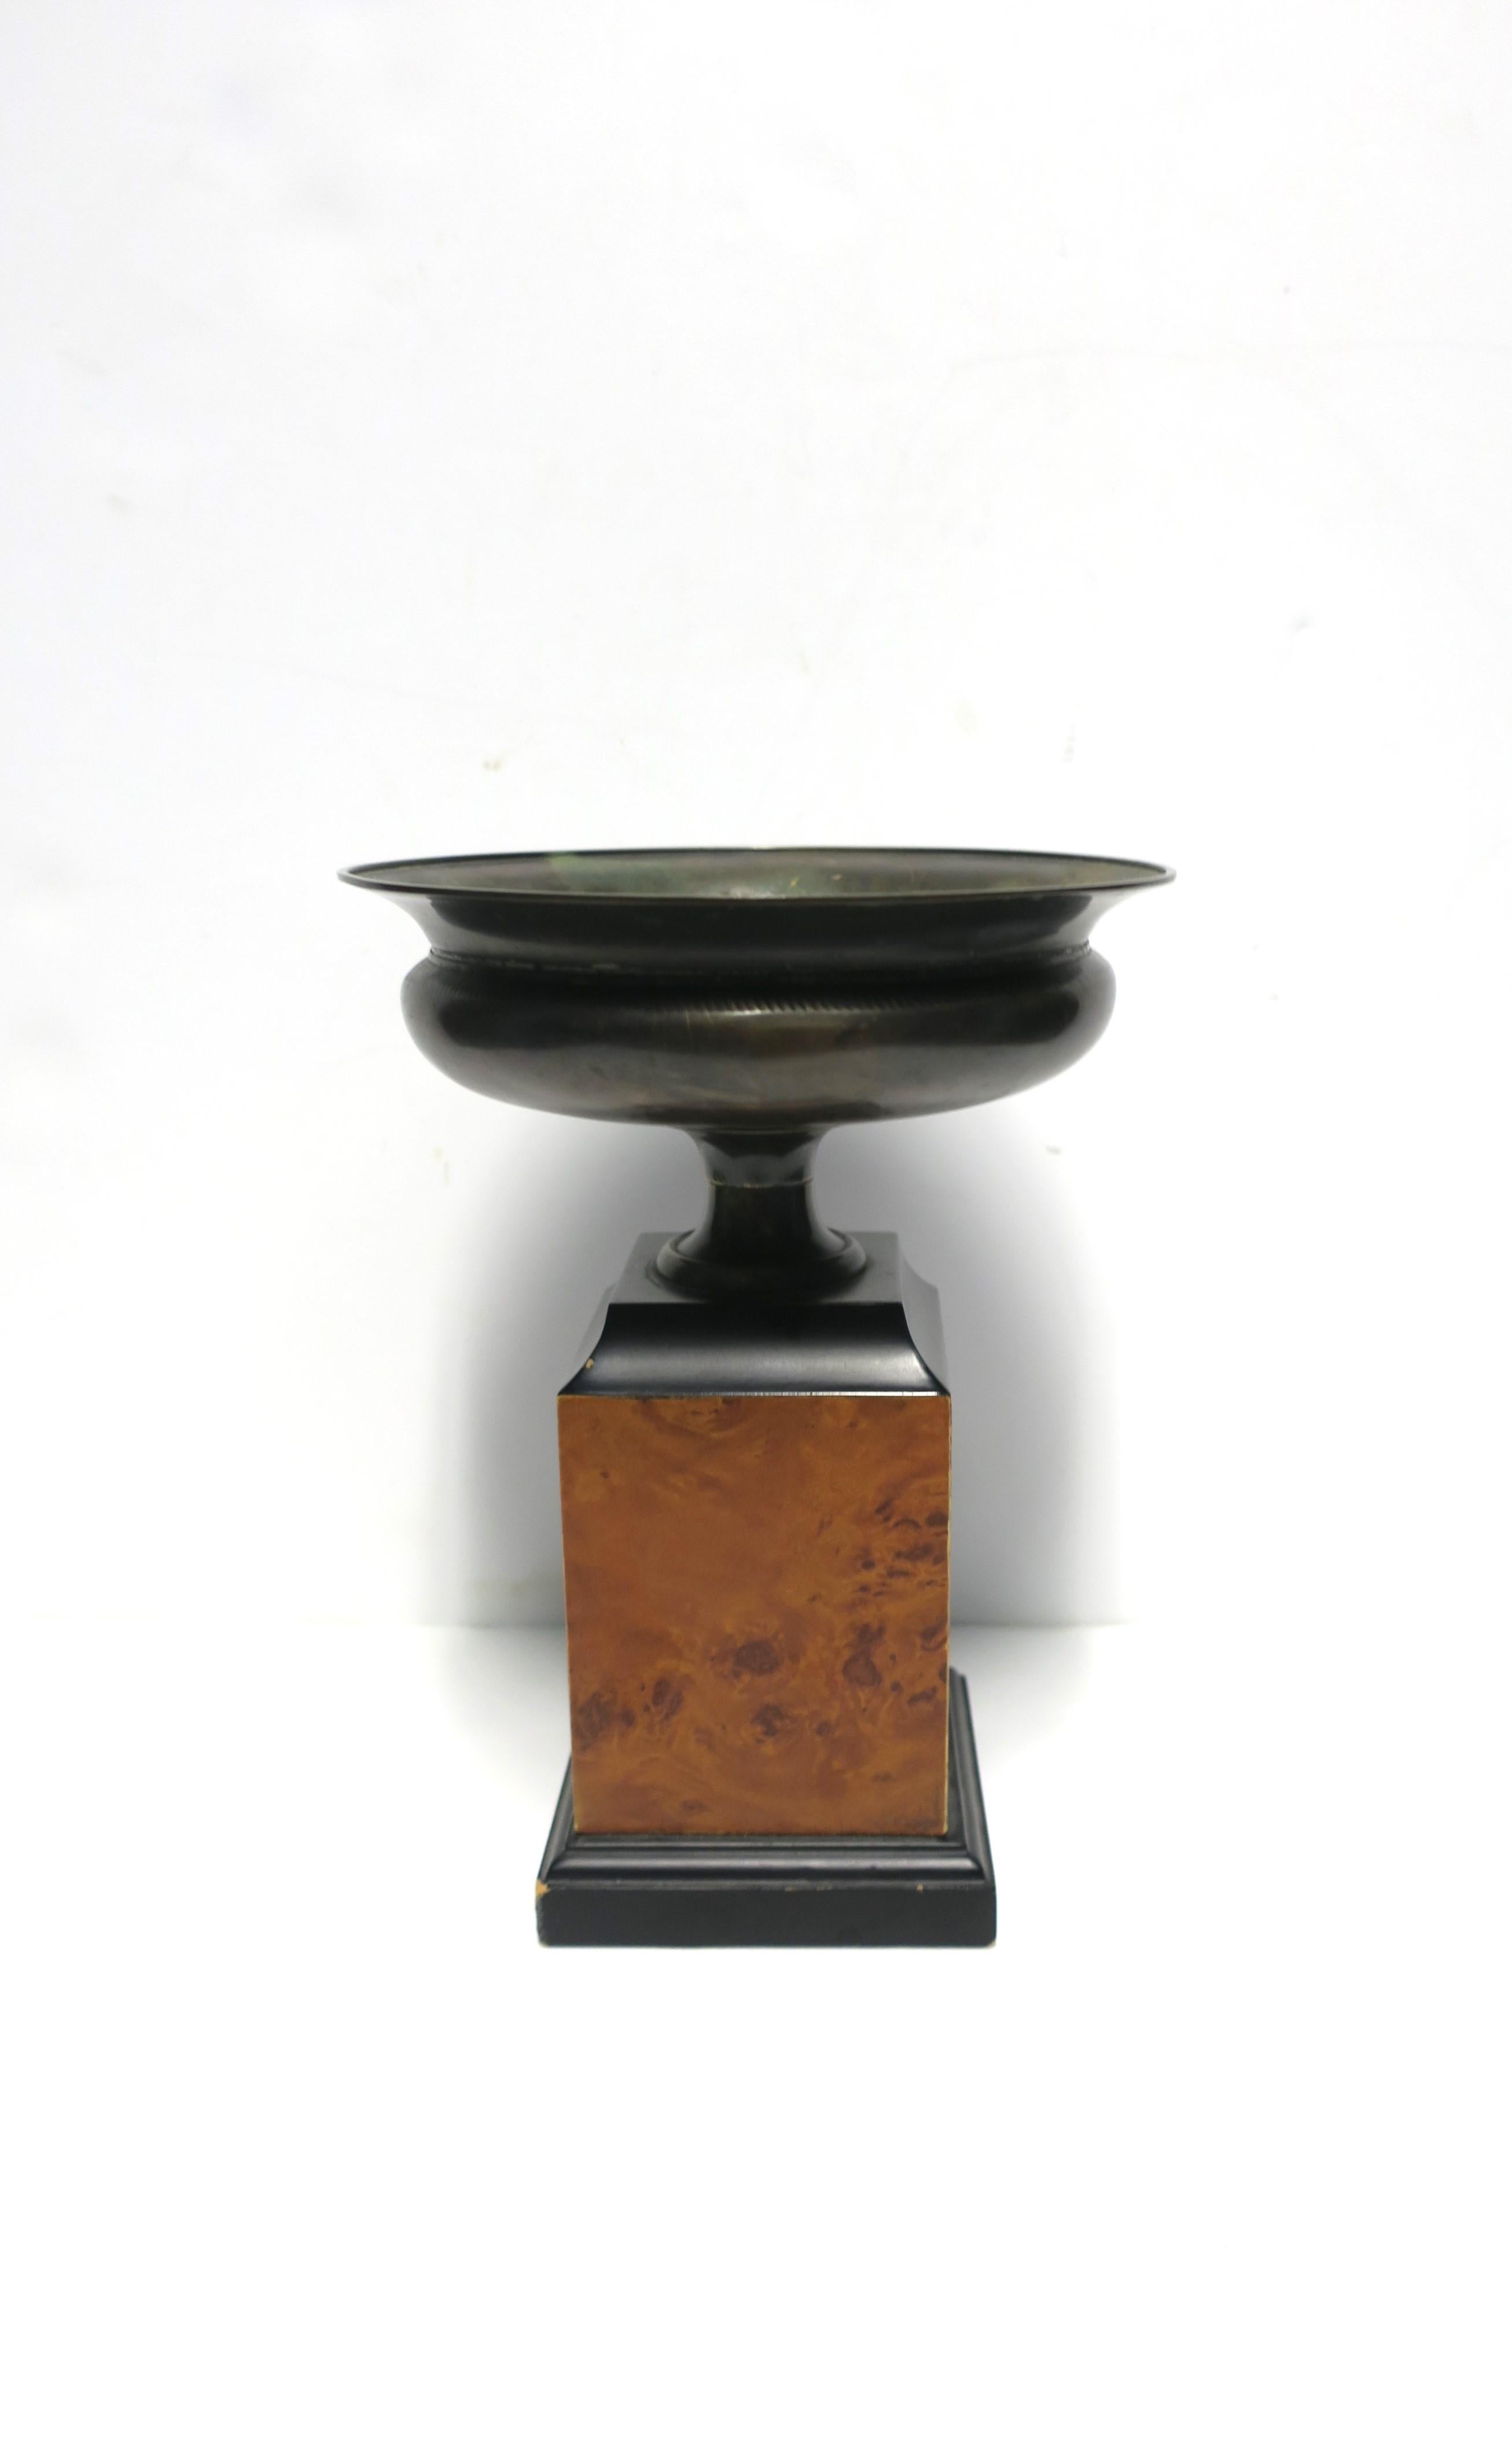 20th Century Bronzed Metal Urn Burl Column Neoclassical Style, circa 1970s For Sale